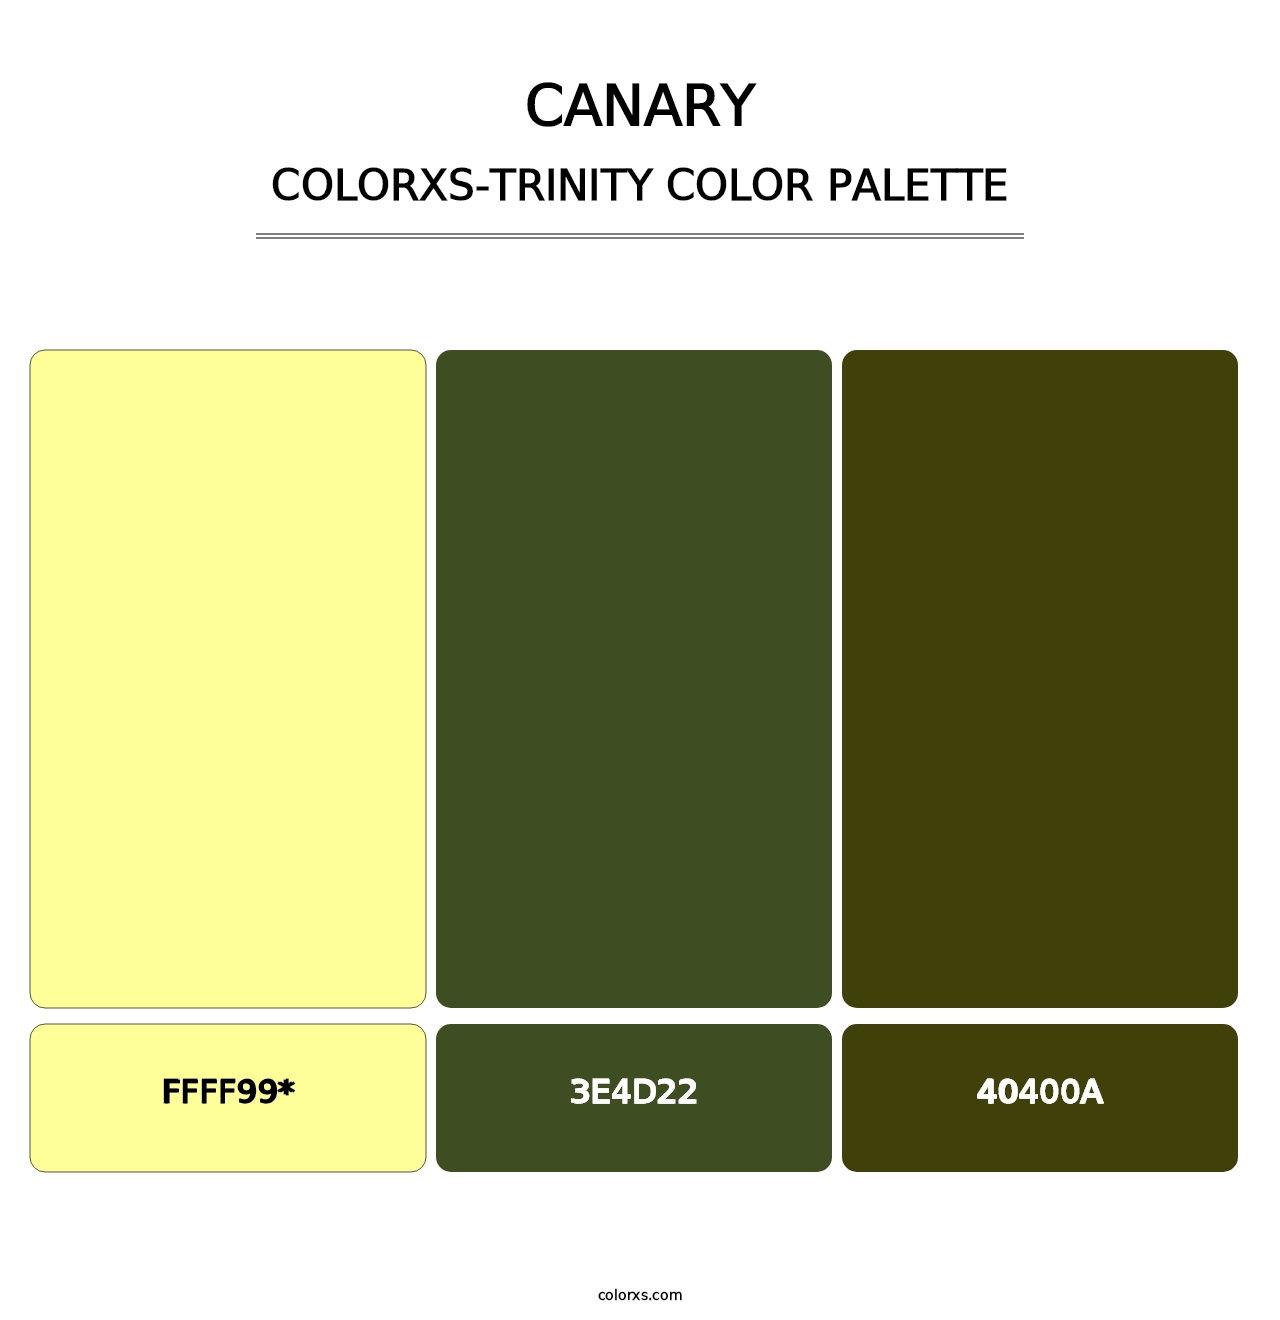 Canary - Colorxs Trinity Palette